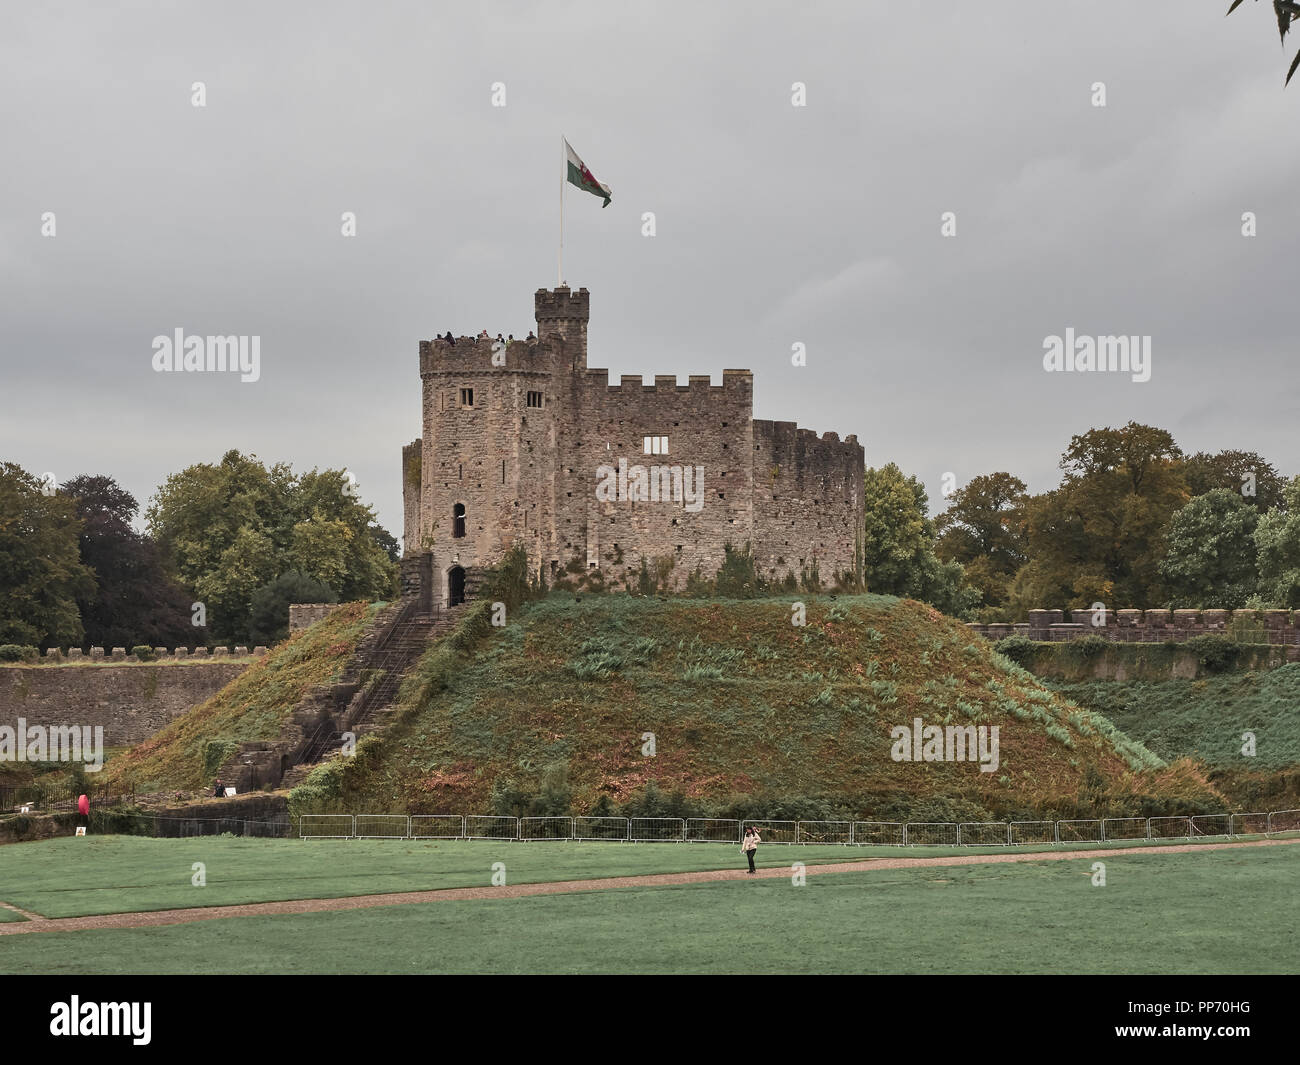 Cardiff, United Kingdom - September 16, 2018: View of the castle of Cardiff Stock Photo